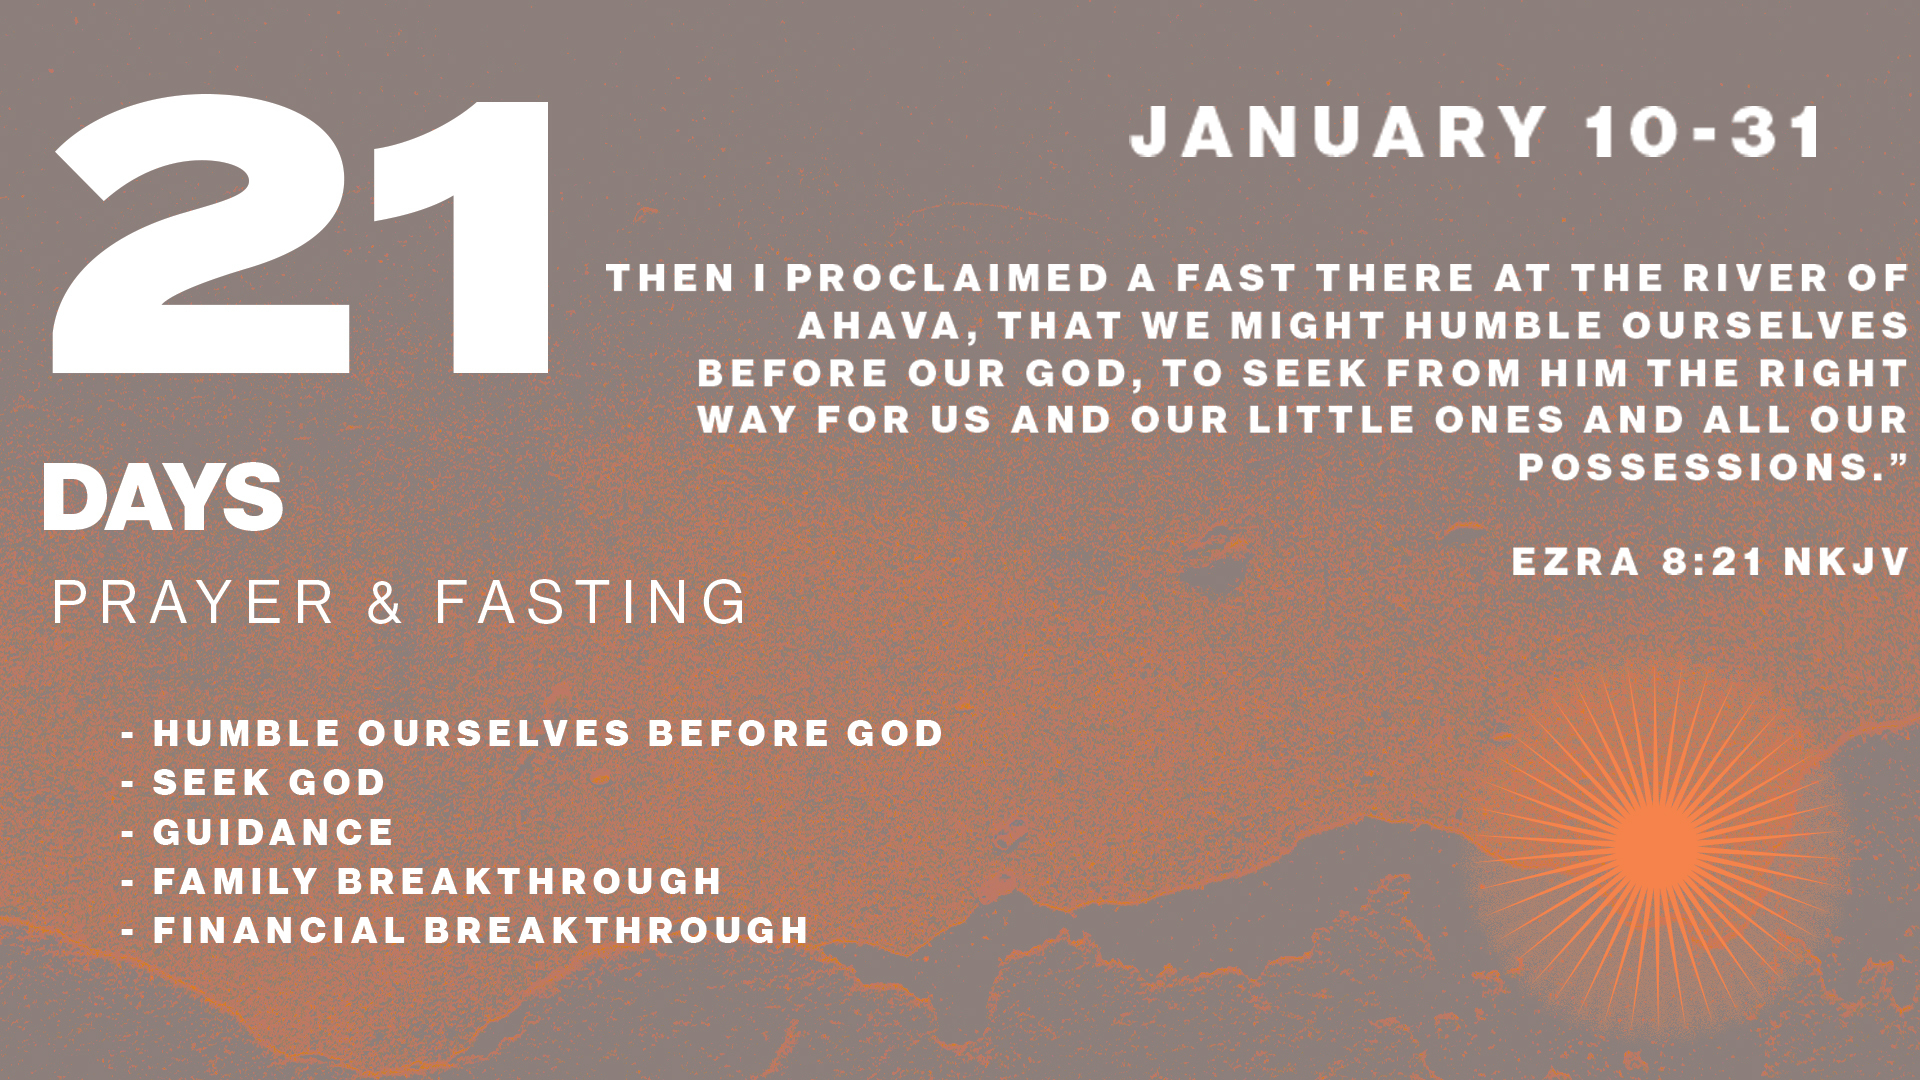 Featured Image for “21 Days of Prayer and Fasting”